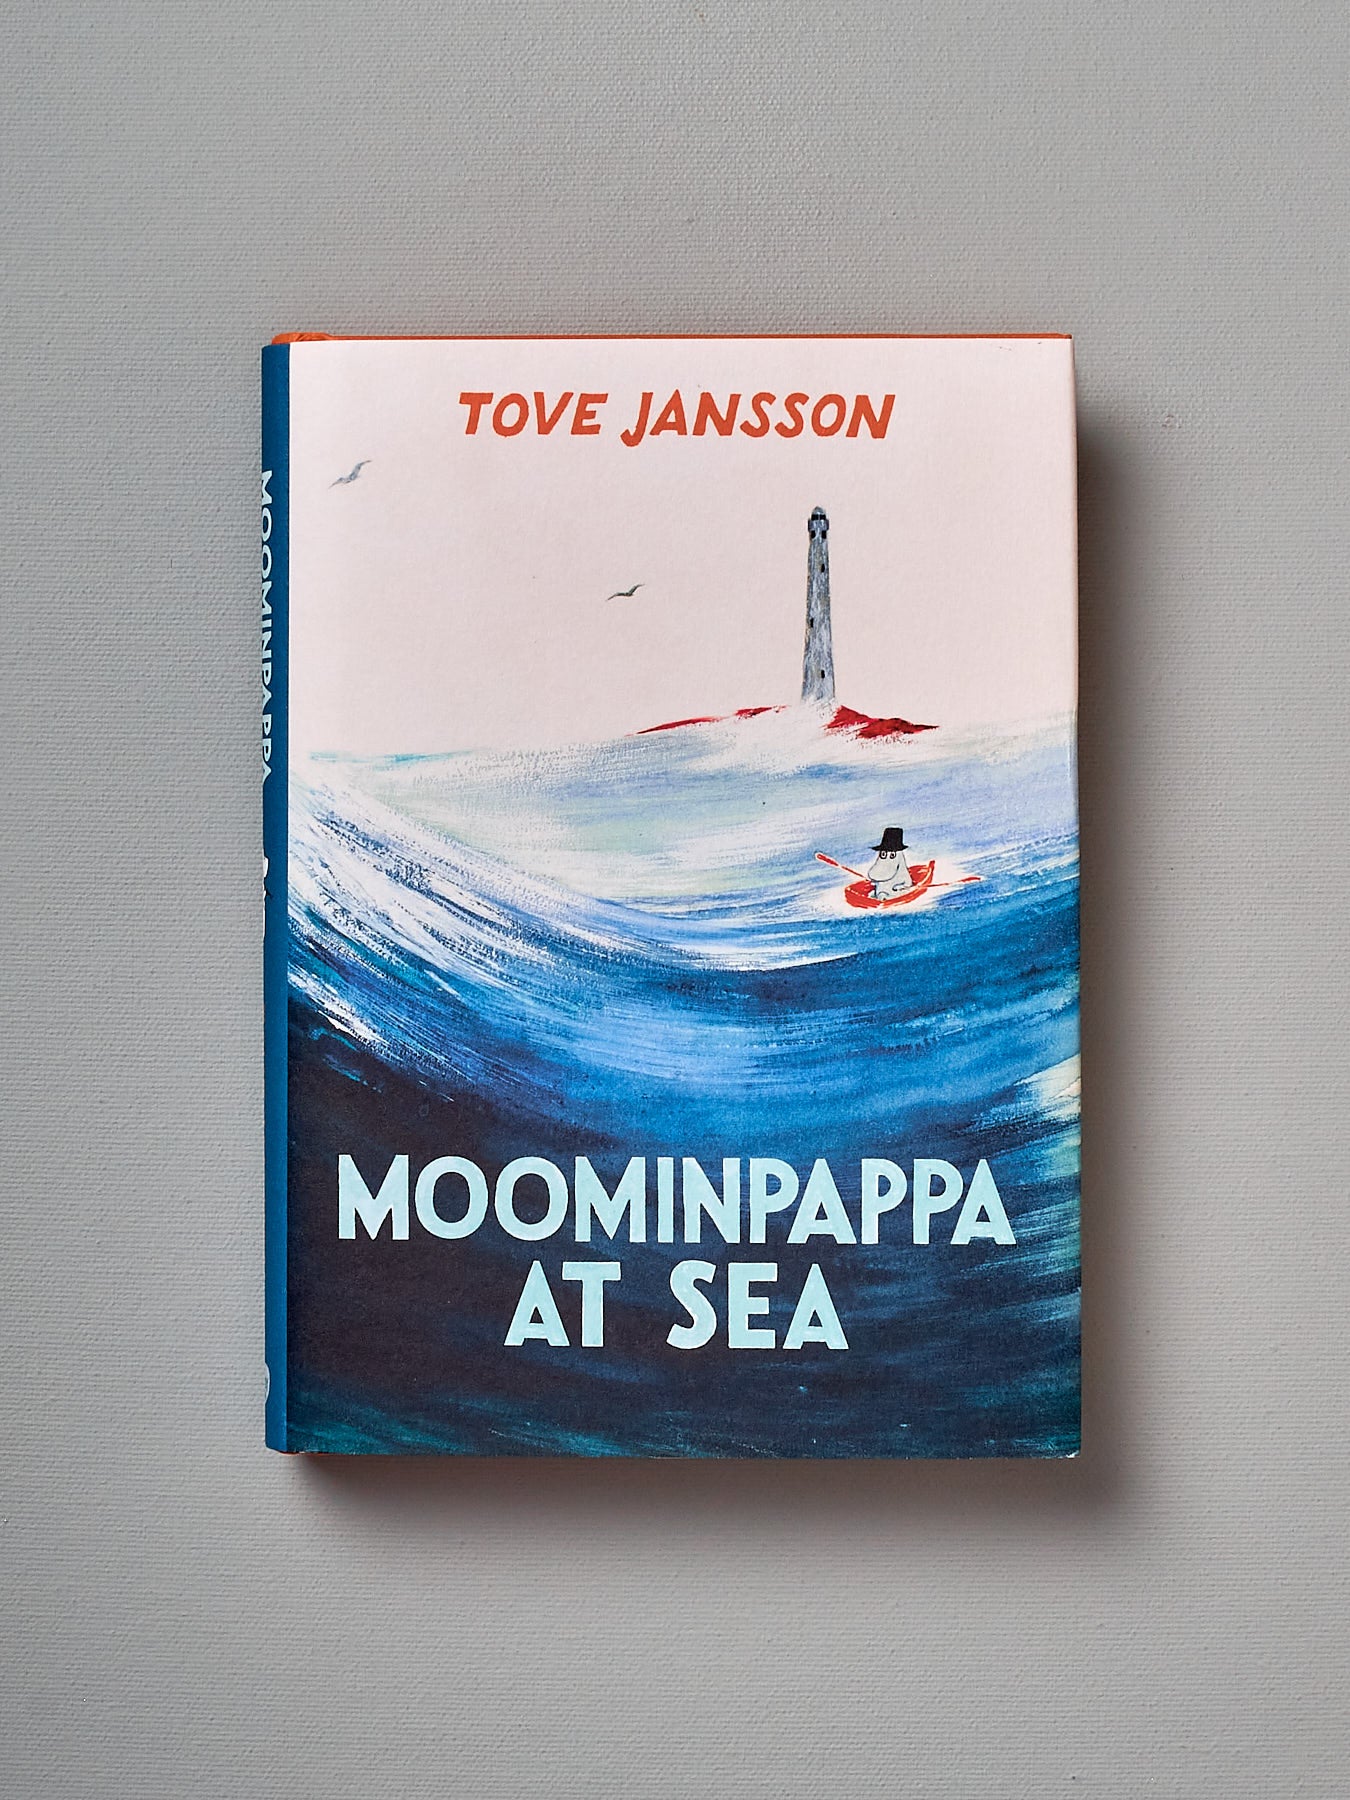 A book with the title Moominpapa at Sea, by Tove Jansson.